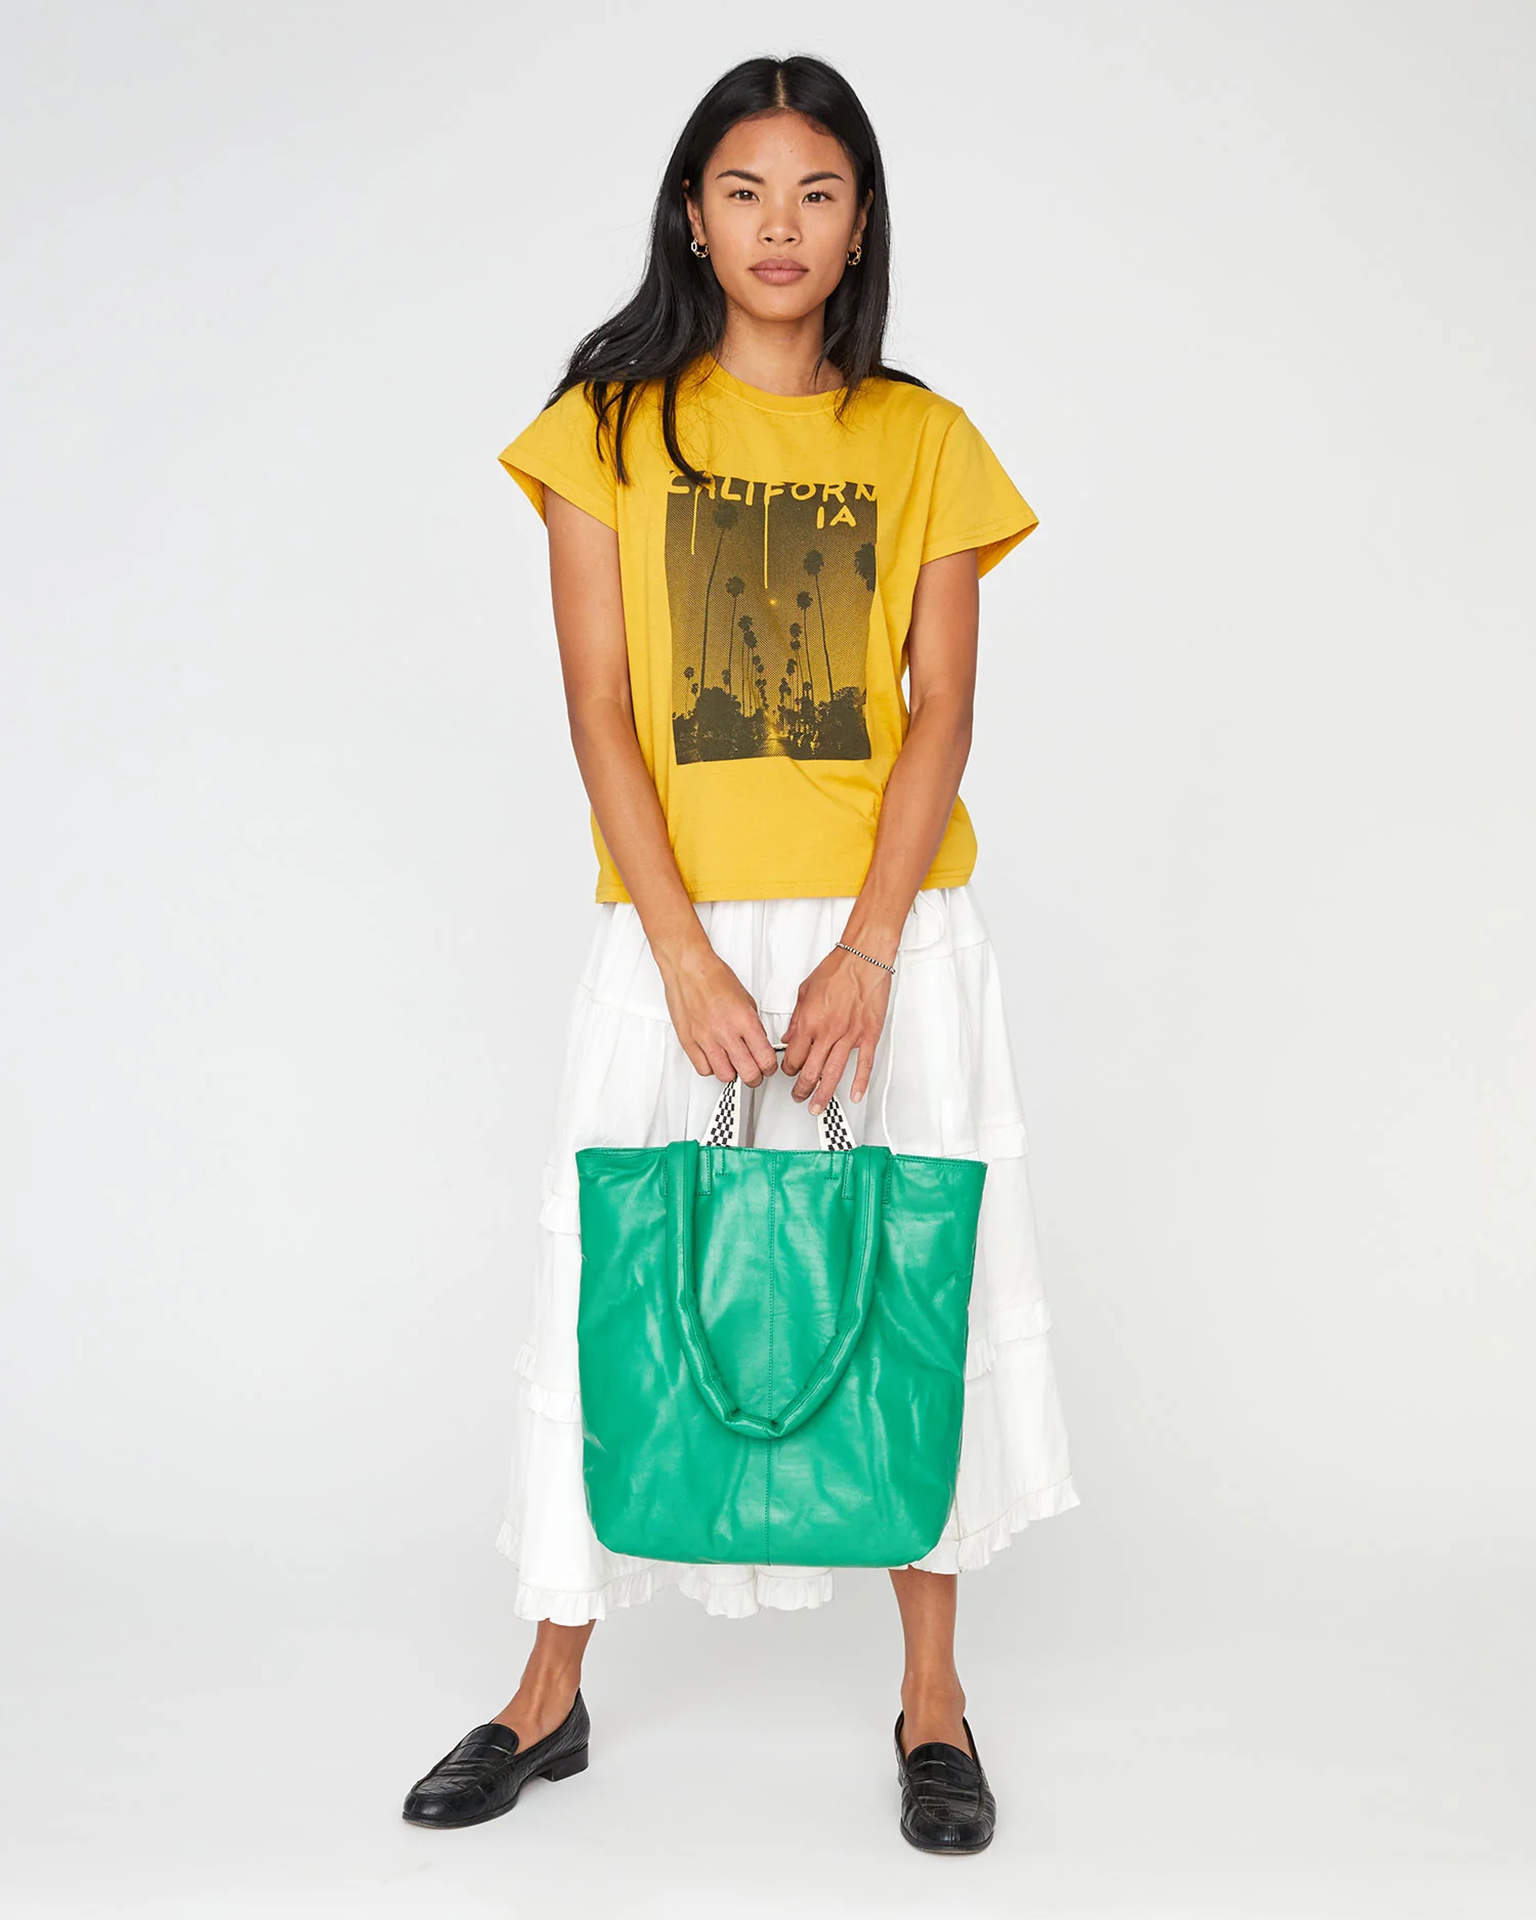 Travailler Magazine Tote in Green Nouvelle Look by Clare V.